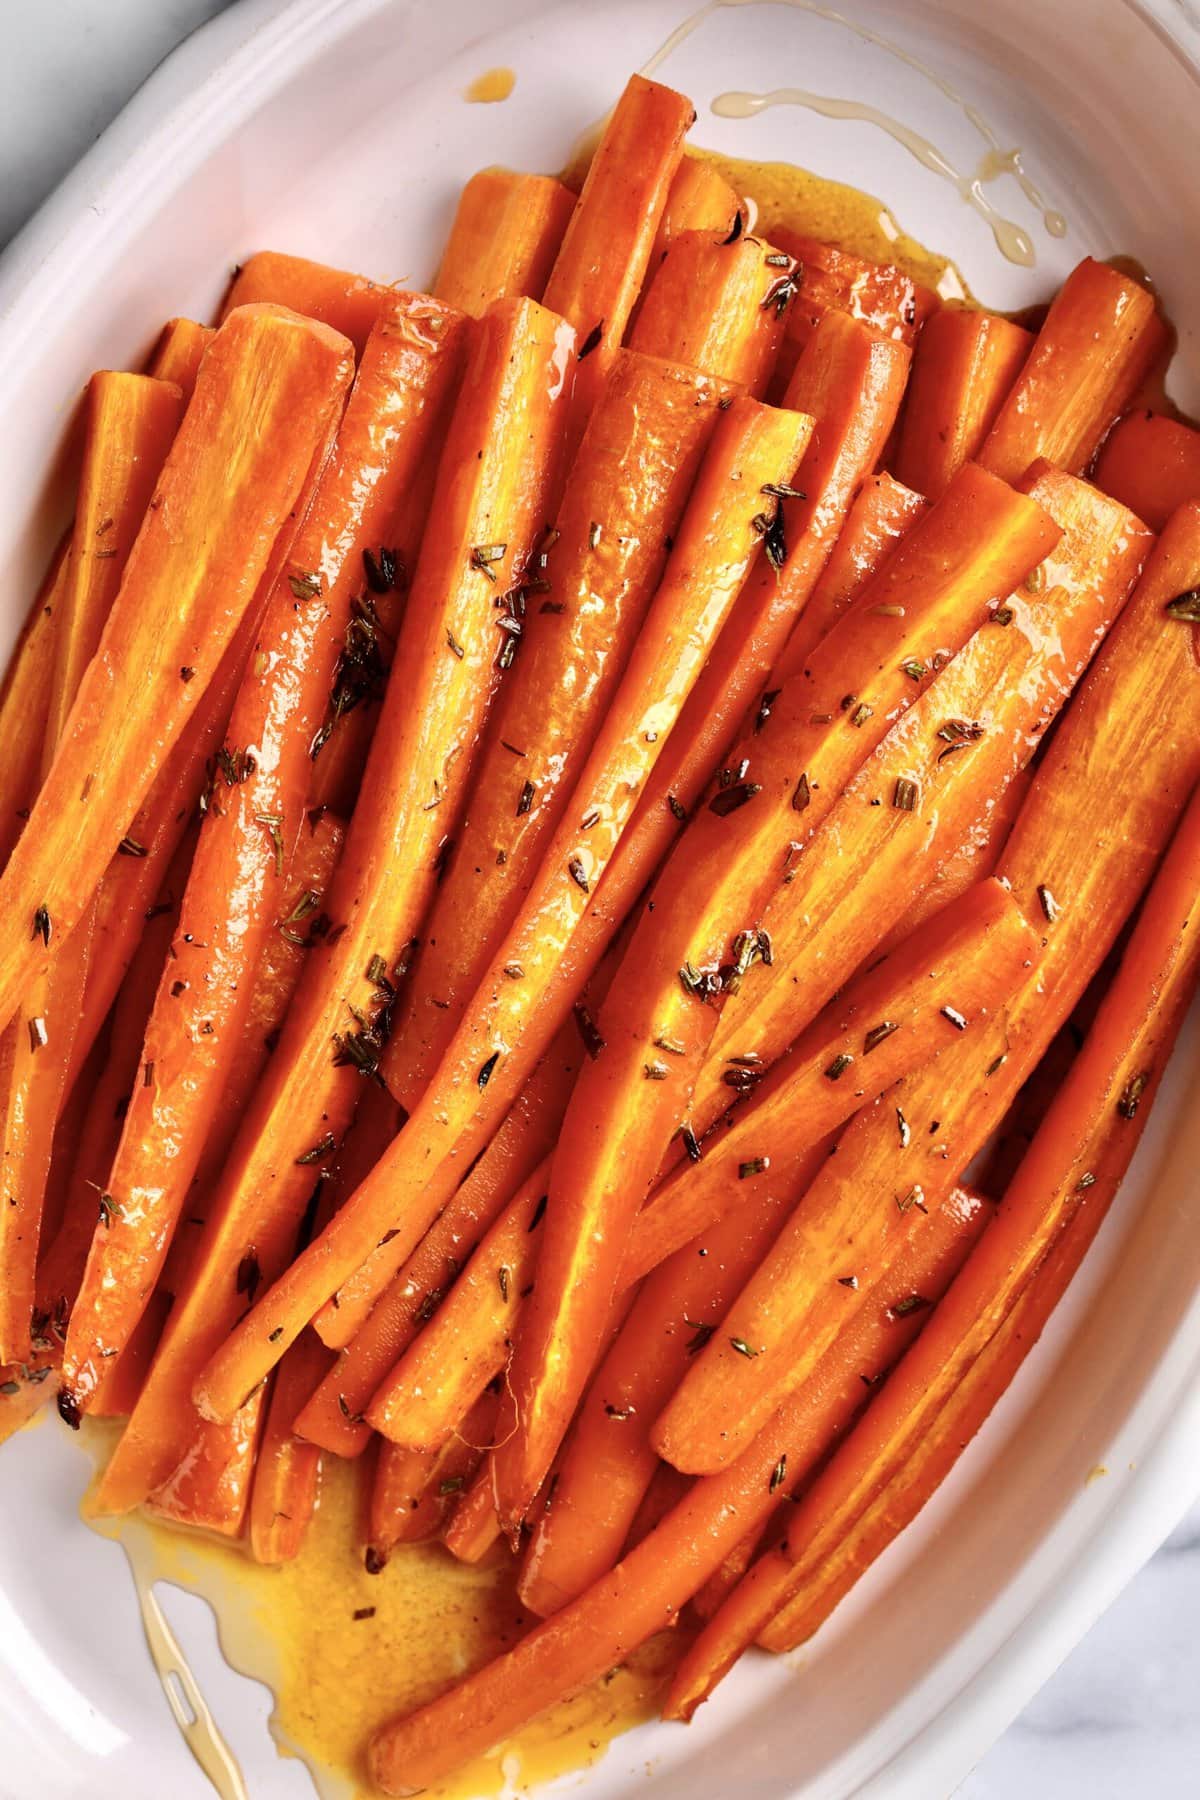 Best Honey Glazed Carrots Recipe (Oven Roasted) in a white serving plate. The carrots are roasted and ready to serve.